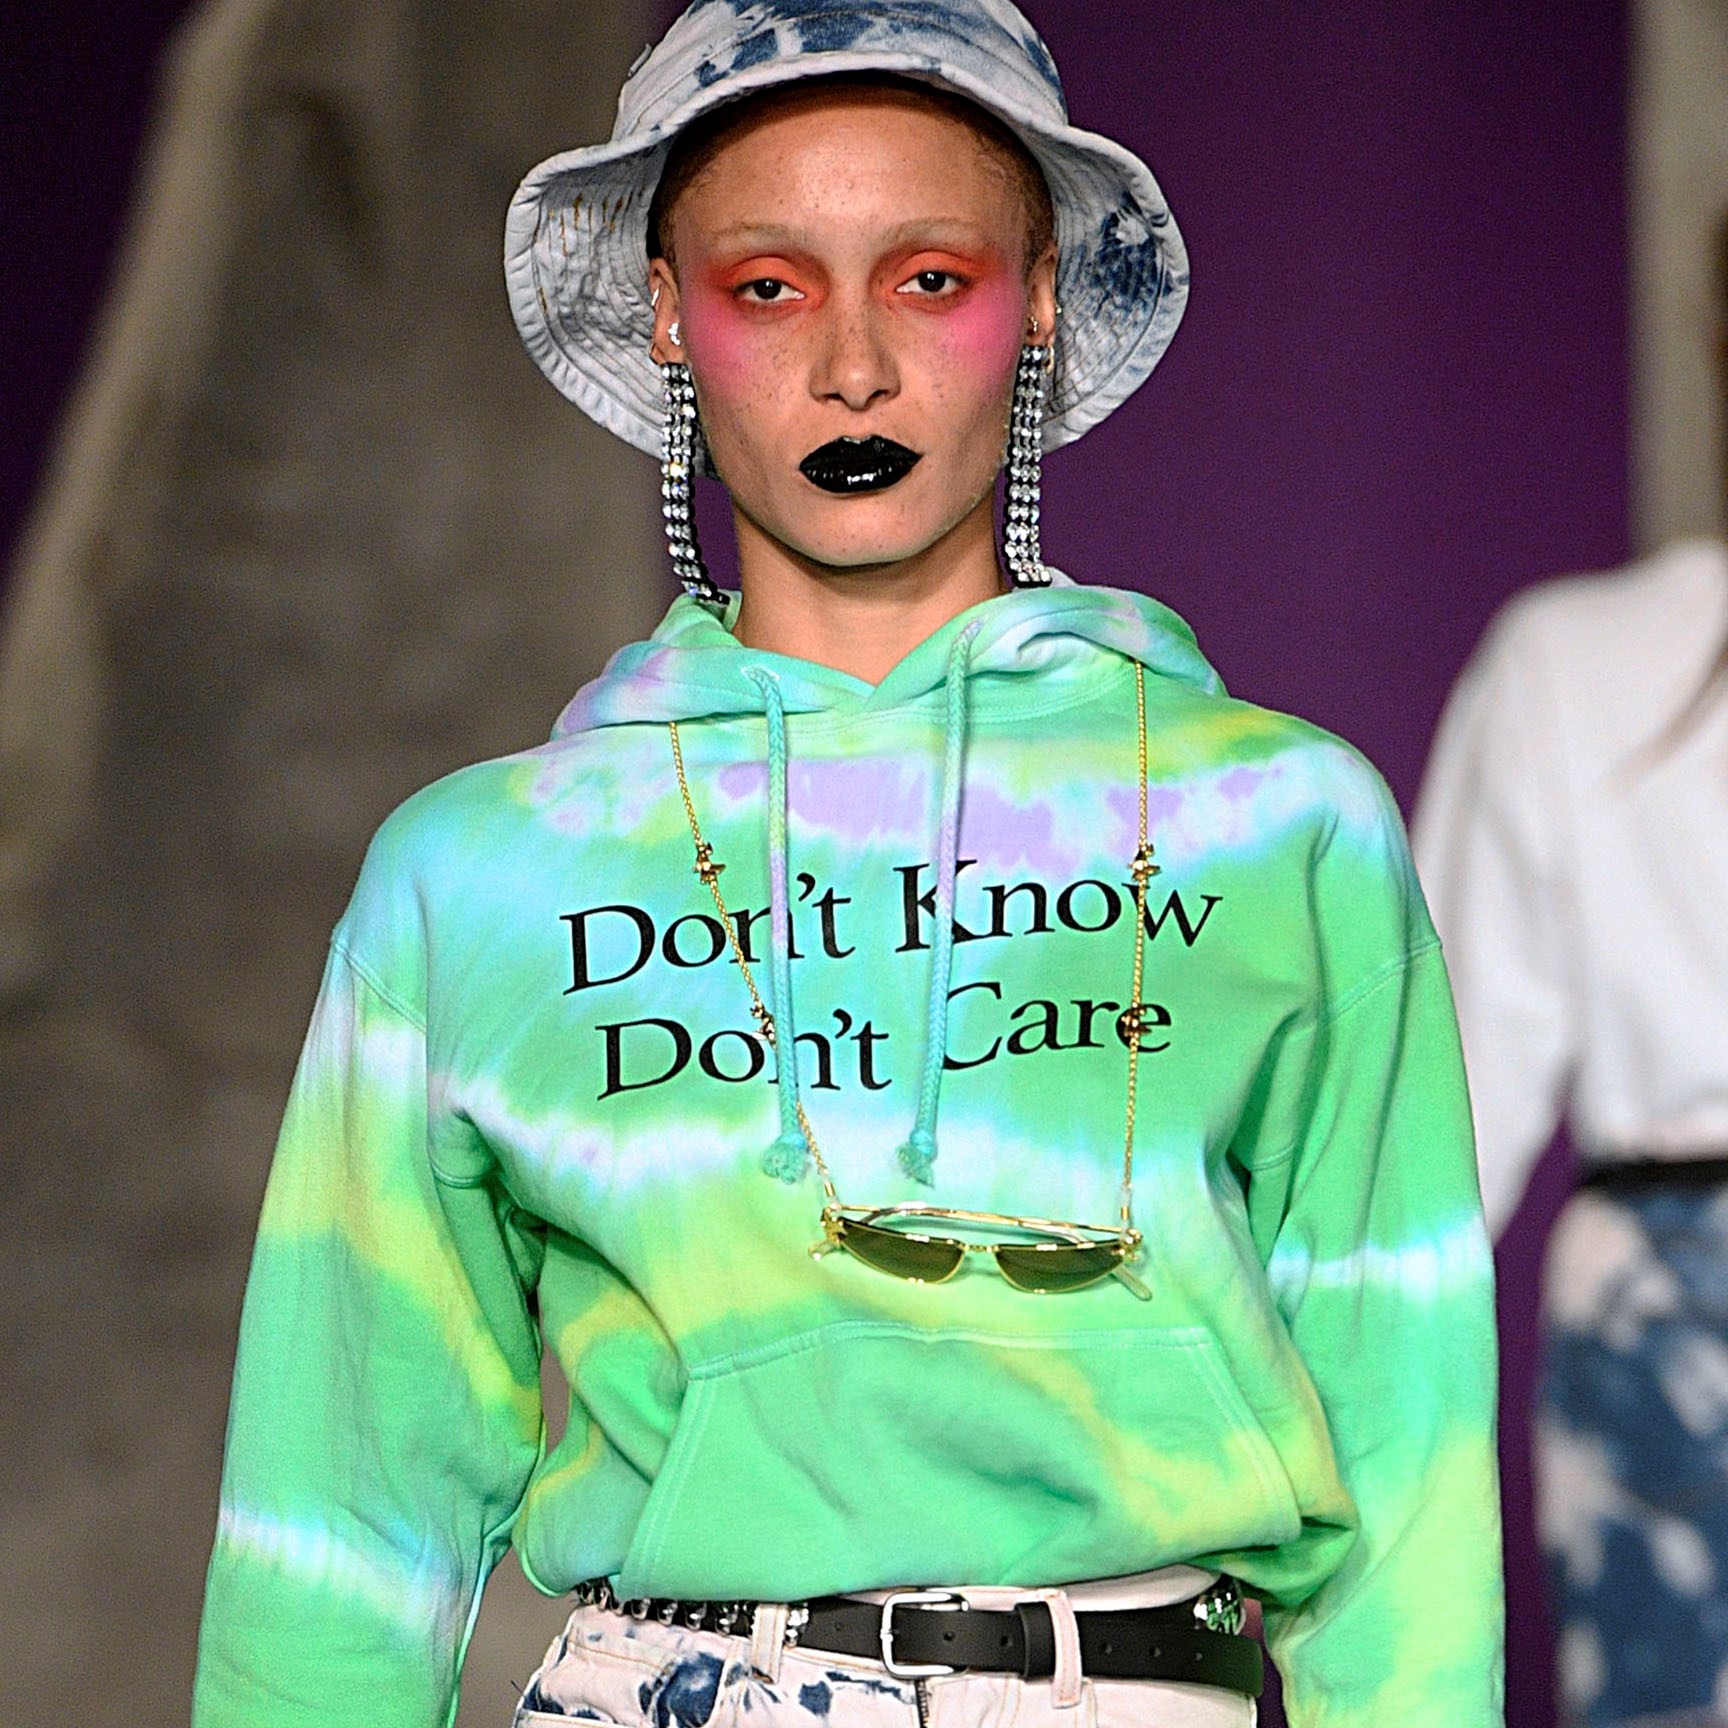 Trying to understand fashion's sudden, inescapable tie-dye obsession | Dazed